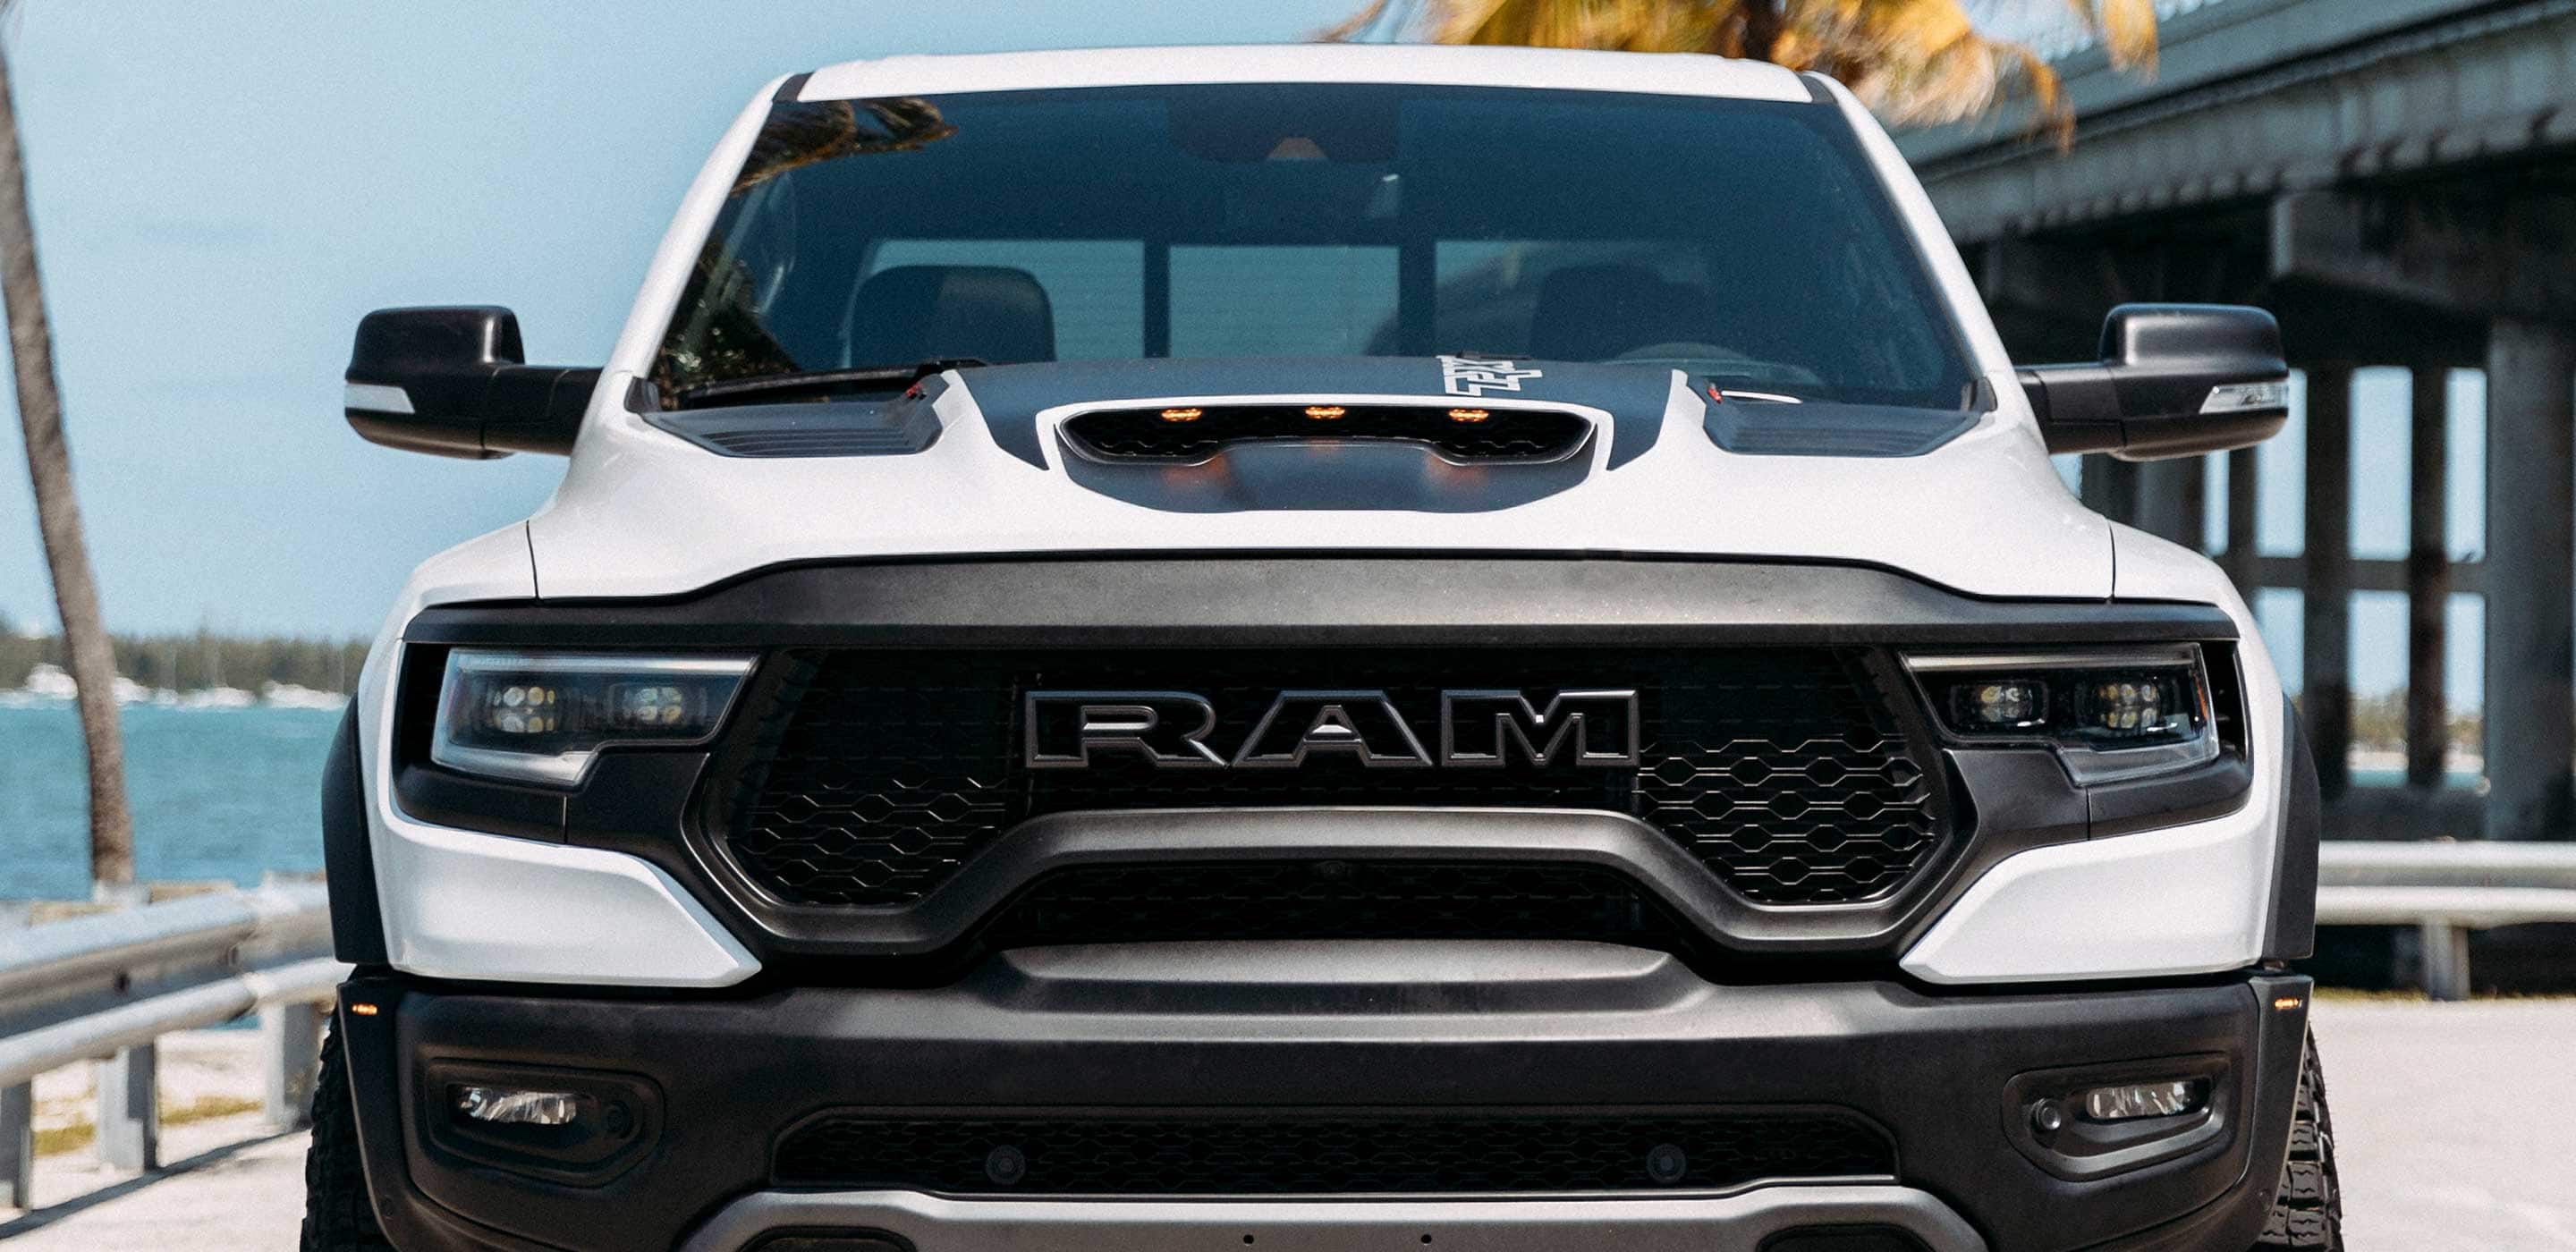 Display A head-on view of the 2022 Ram TRX showing the hood scoop and built-in LEDs.